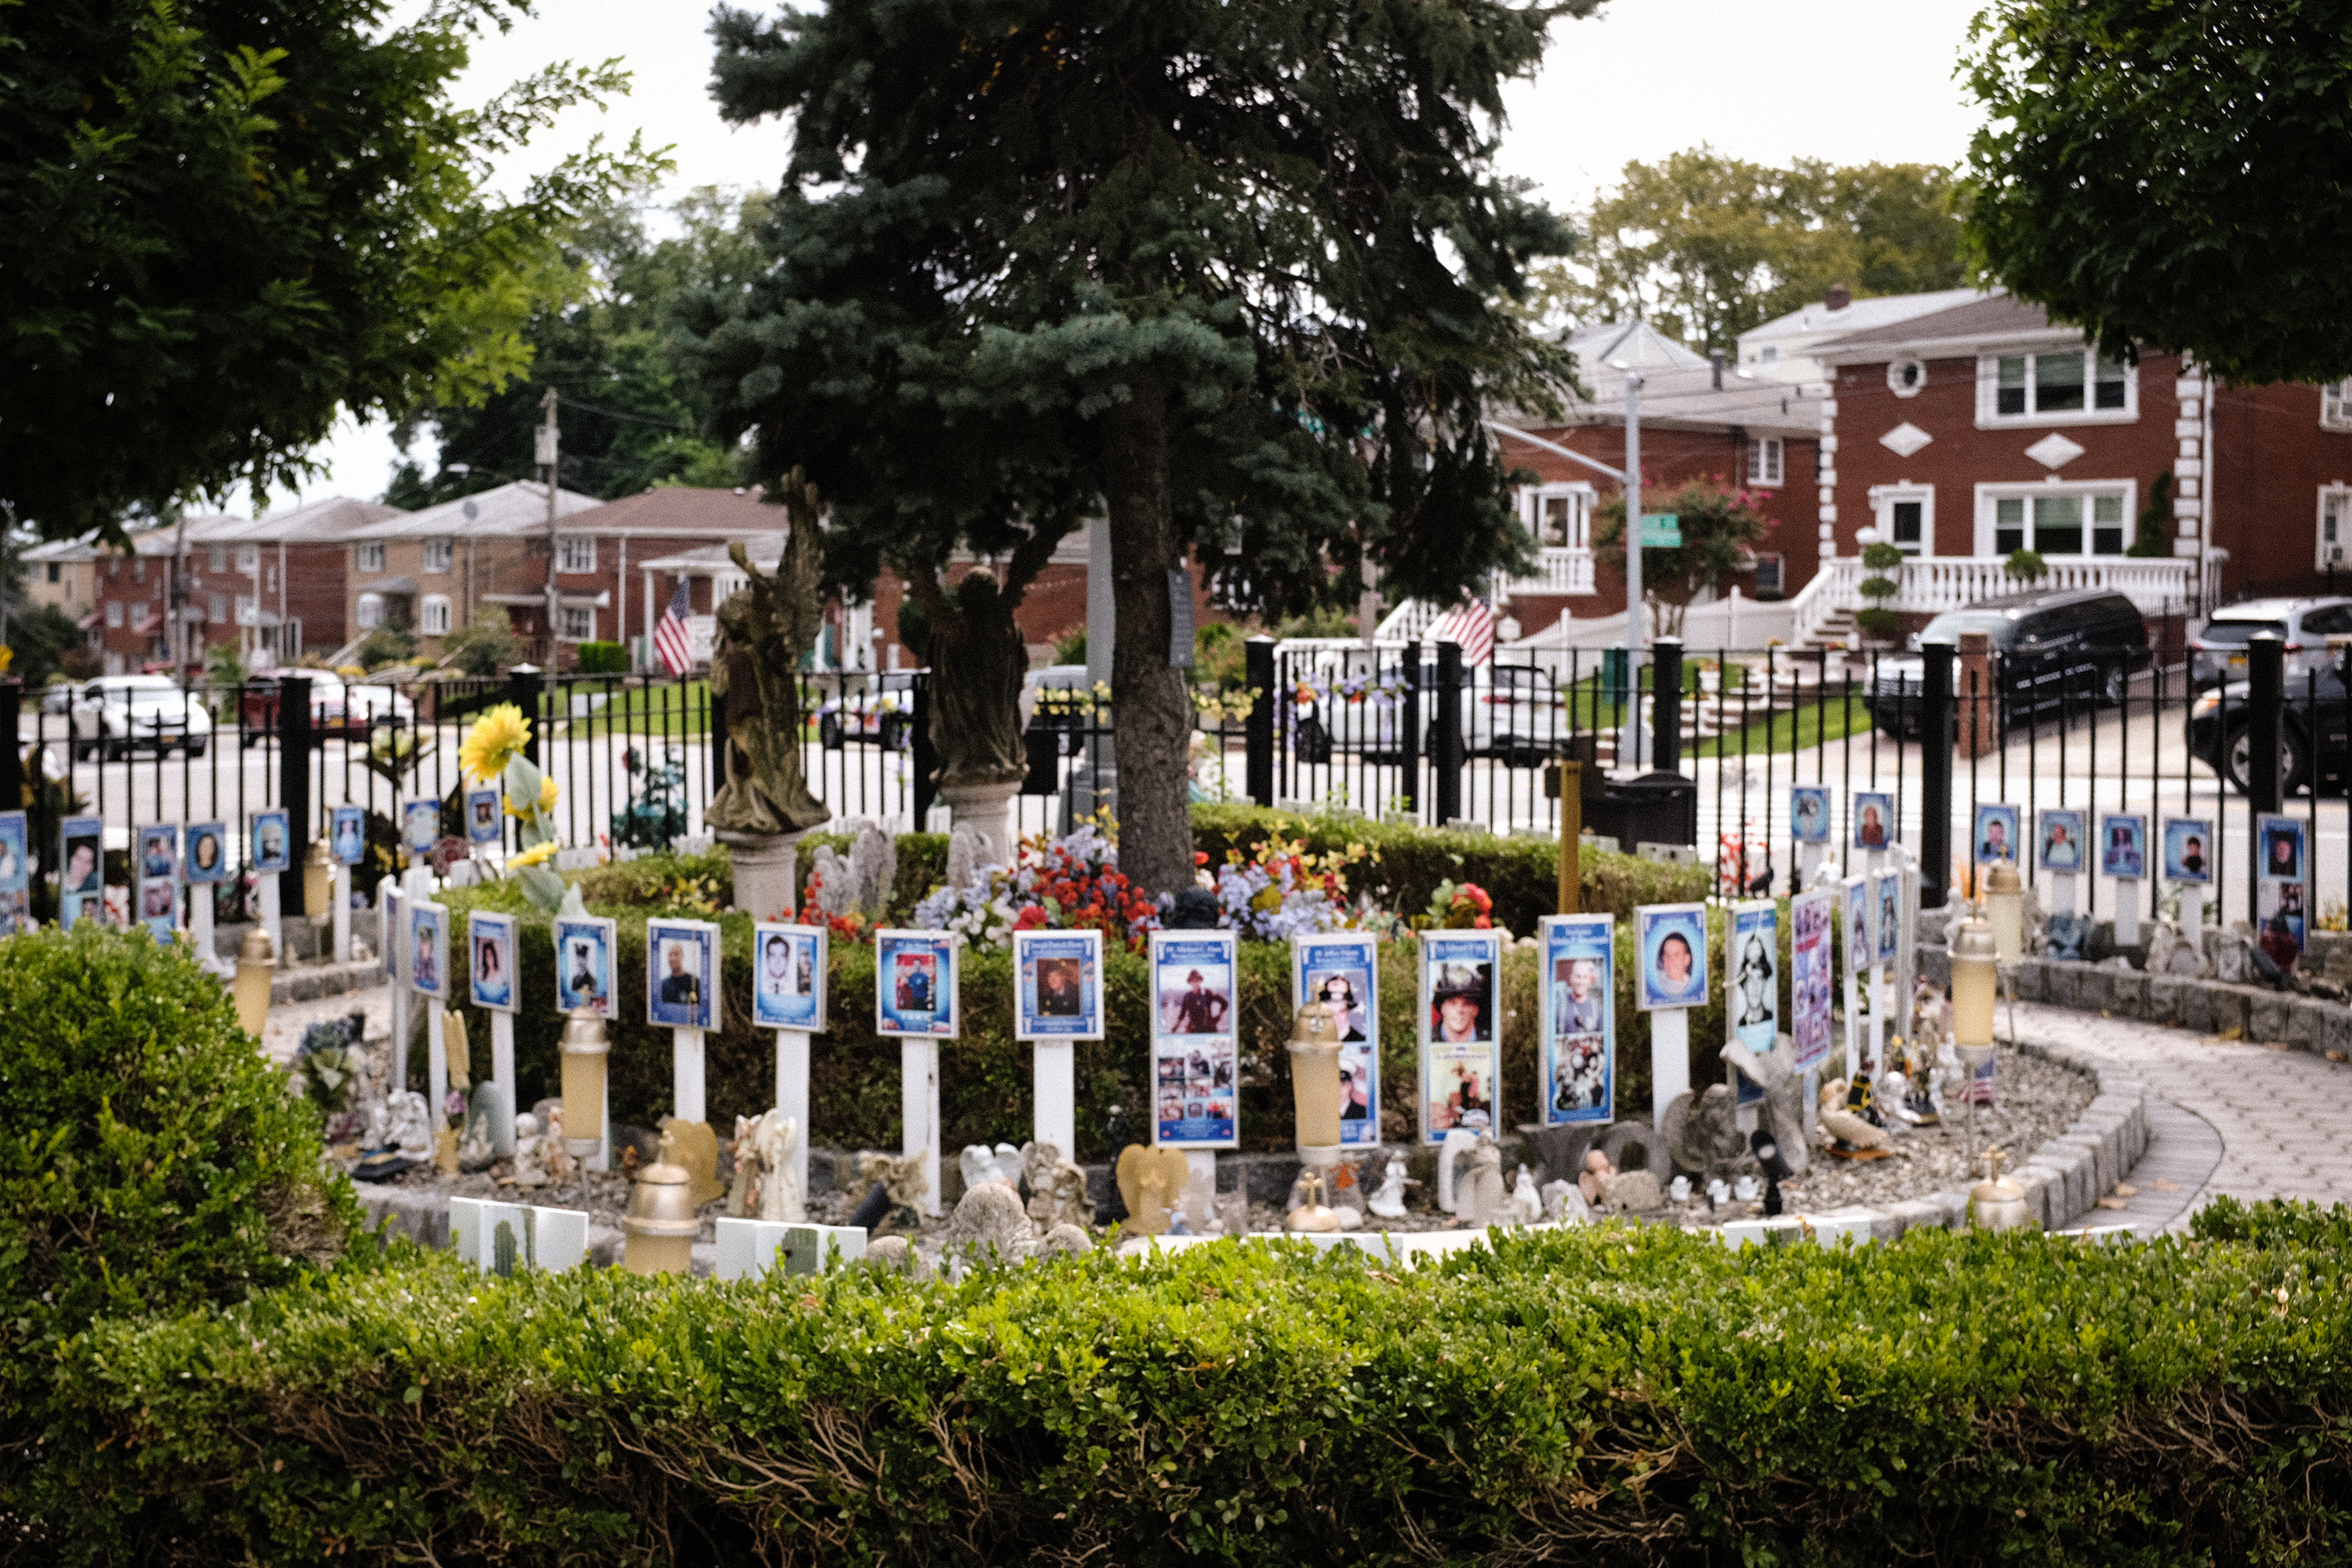 Wendy Pellegrino created Angels’ Circle in the Concord section of Staten Island to have a place for people to remember and see loved ones lost on 9/11.